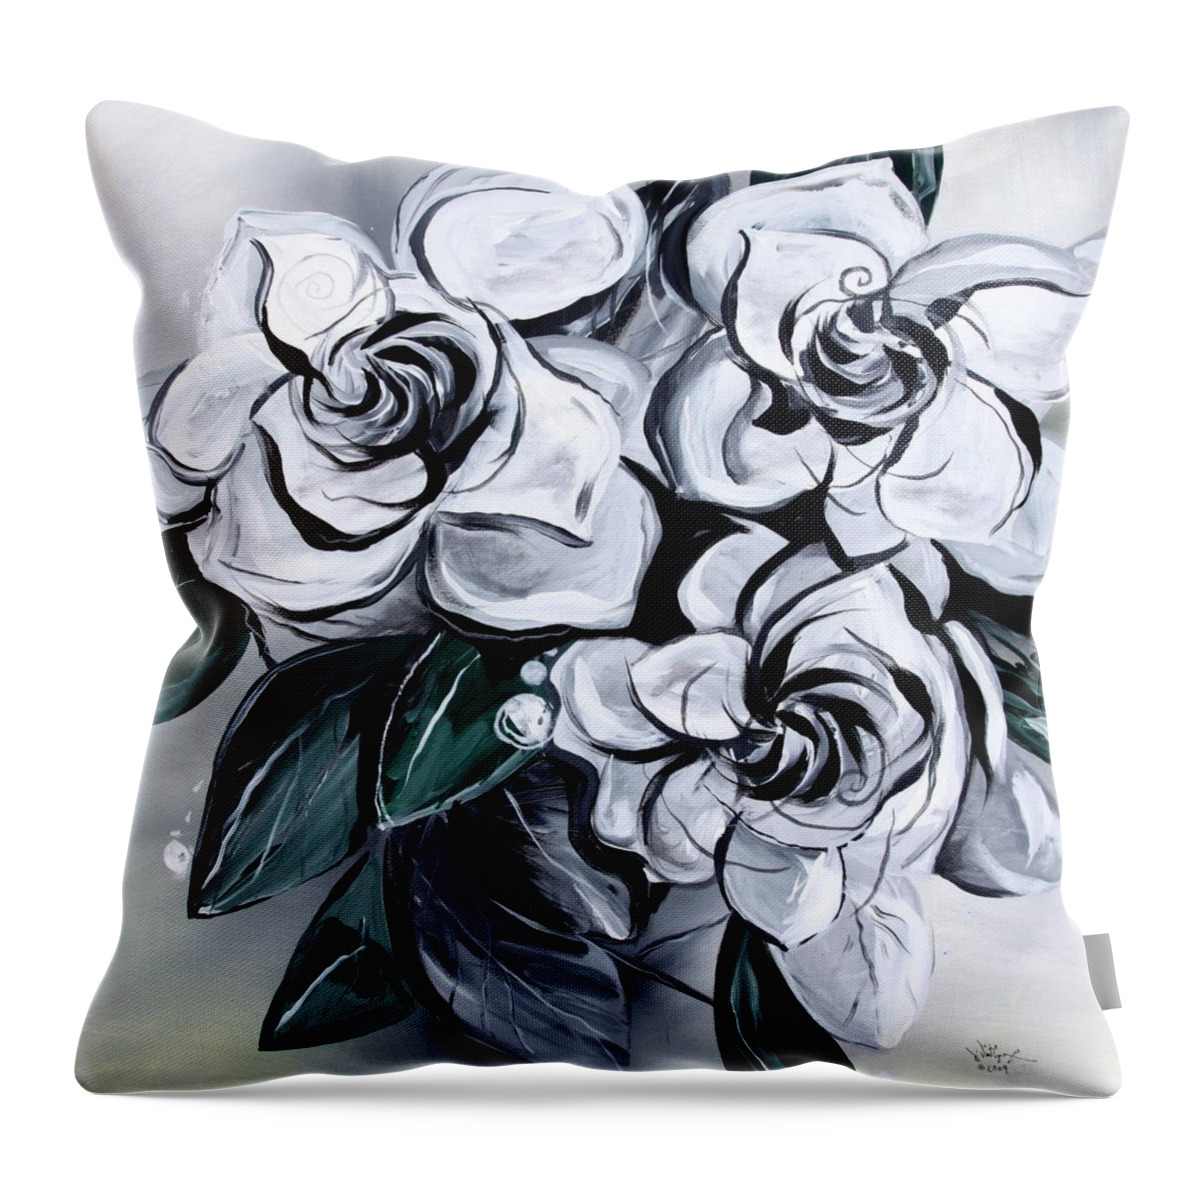 Gardenias Throw Pillow featuring the painting Abstract Gardenias by J Vincent Scarpace